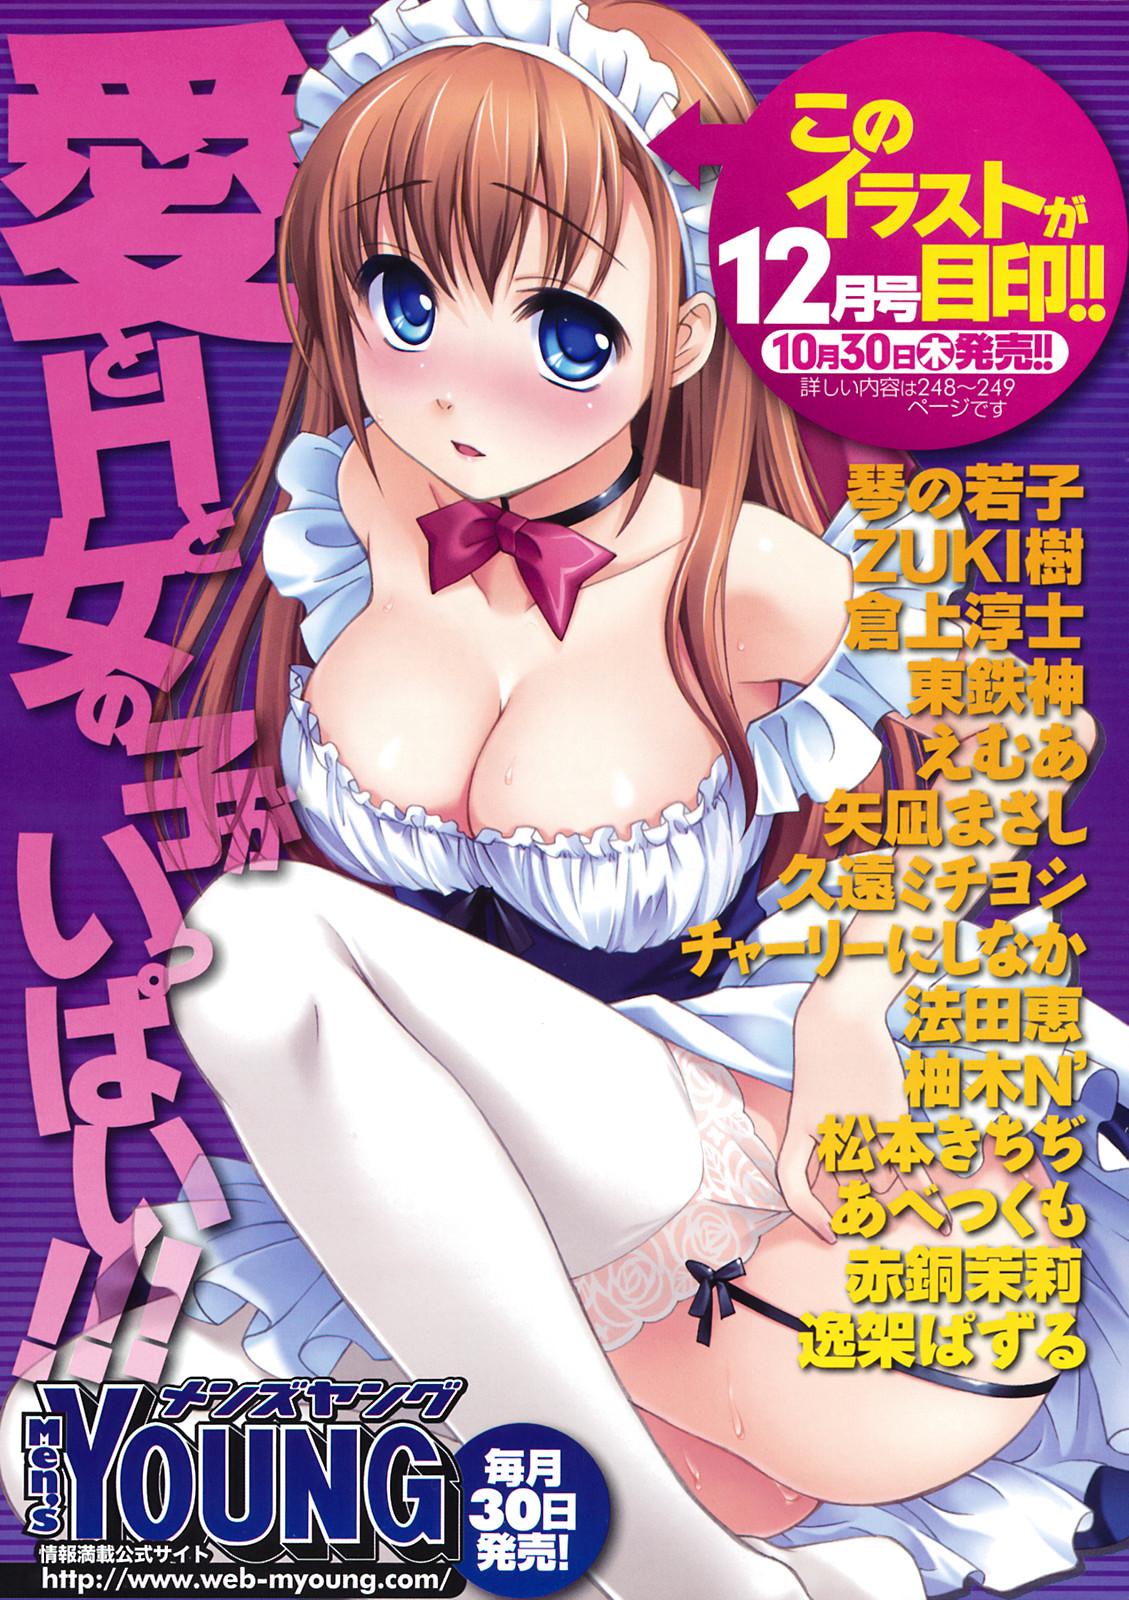 Men's Young Special Ikazuchi Vol 08 7